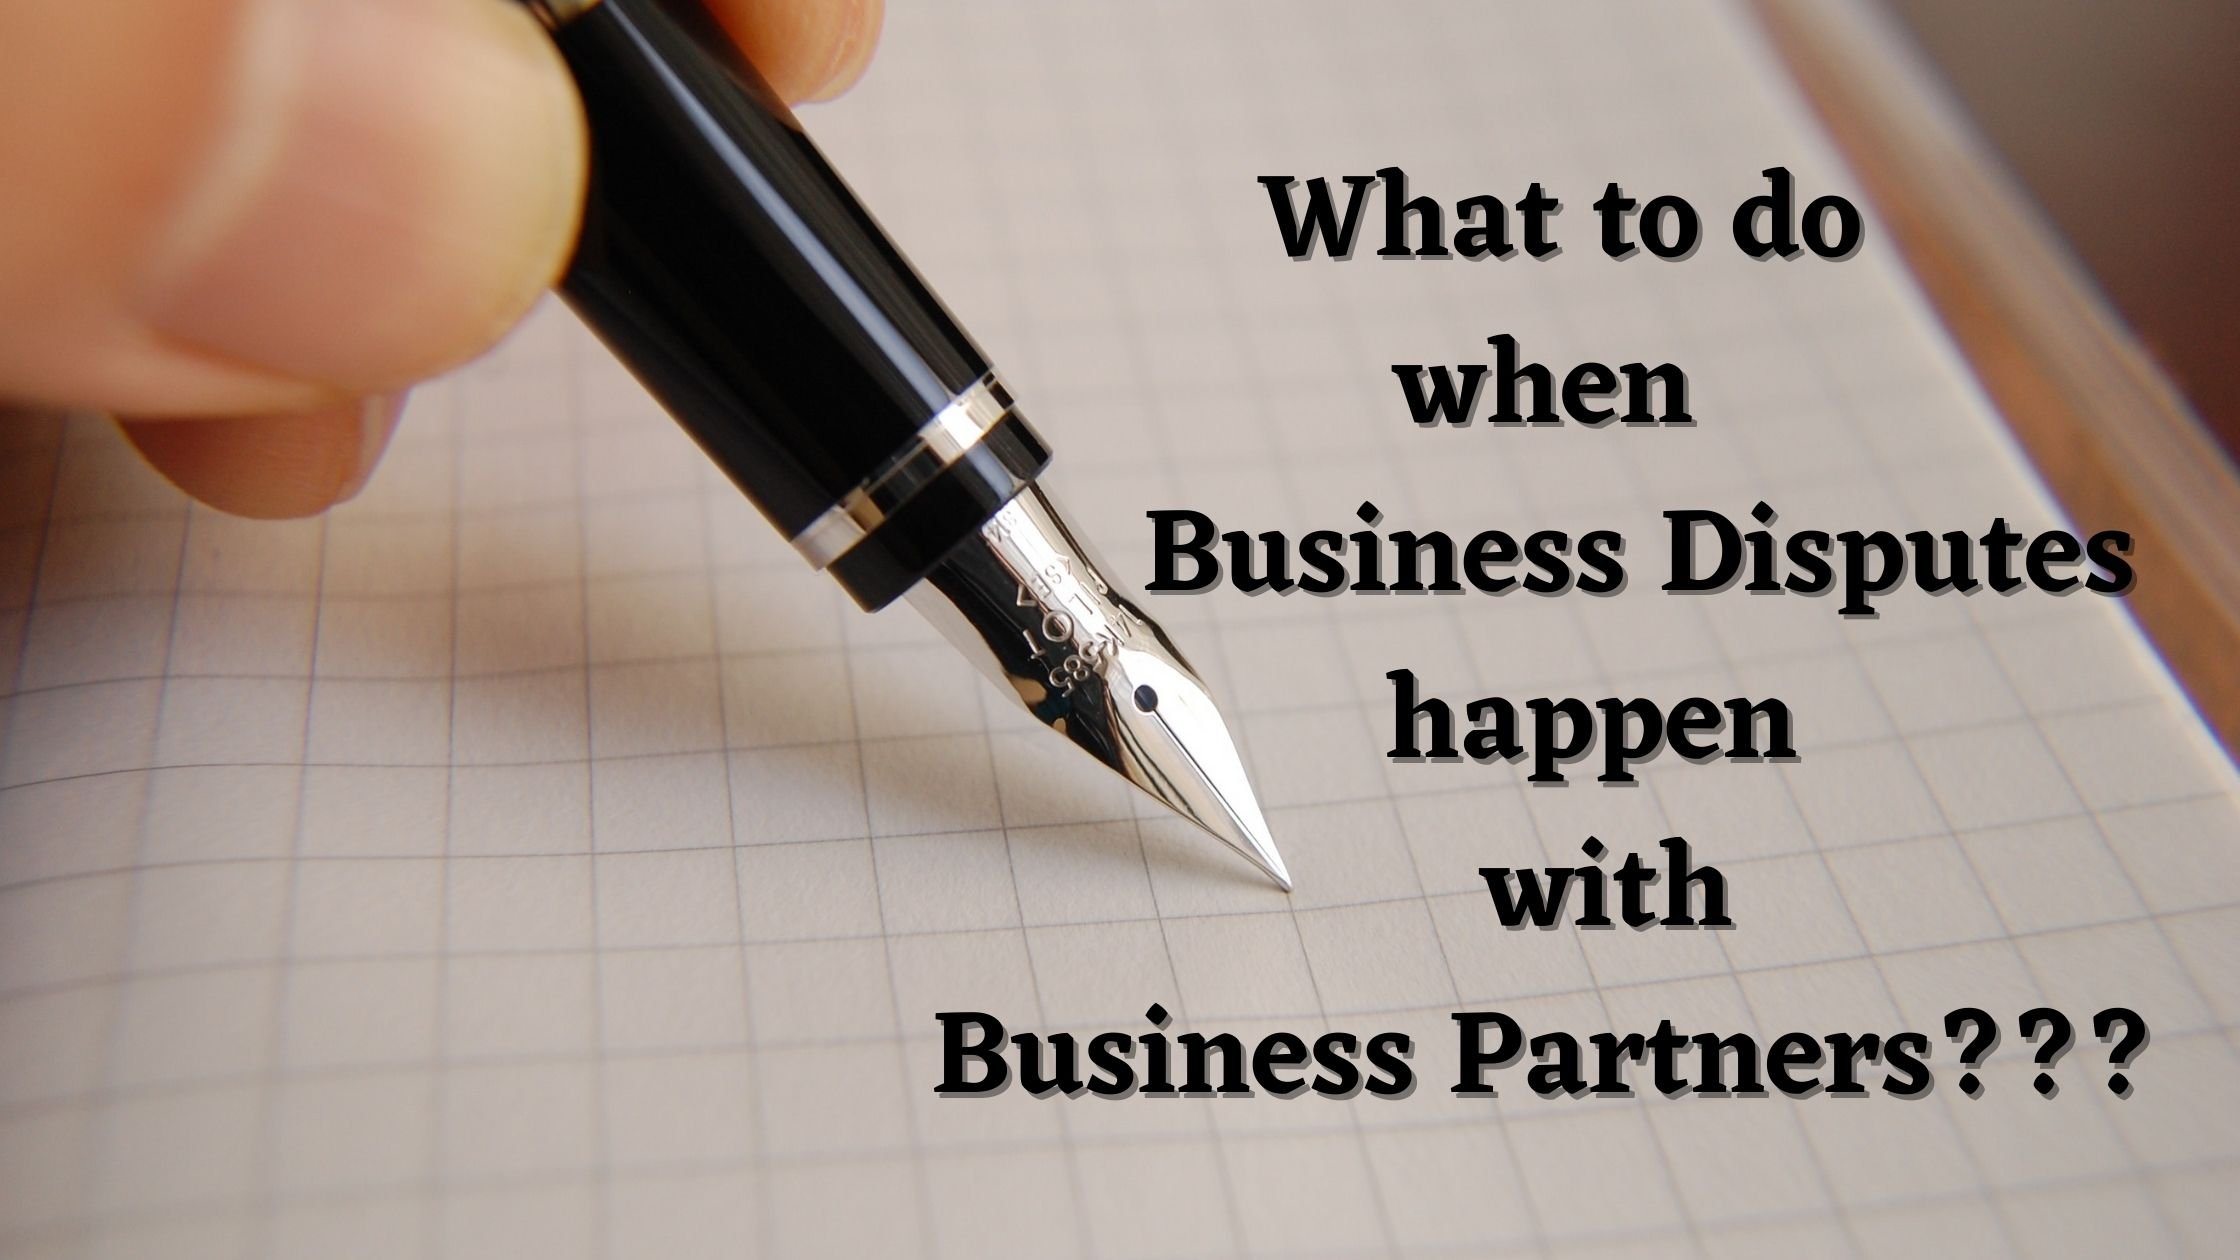 7 TIPS ON WHAT TO DO WHEN SMALL BUSINESS DISPUTES HAPPEN WITH YOUR BUSINESS PARTNER 